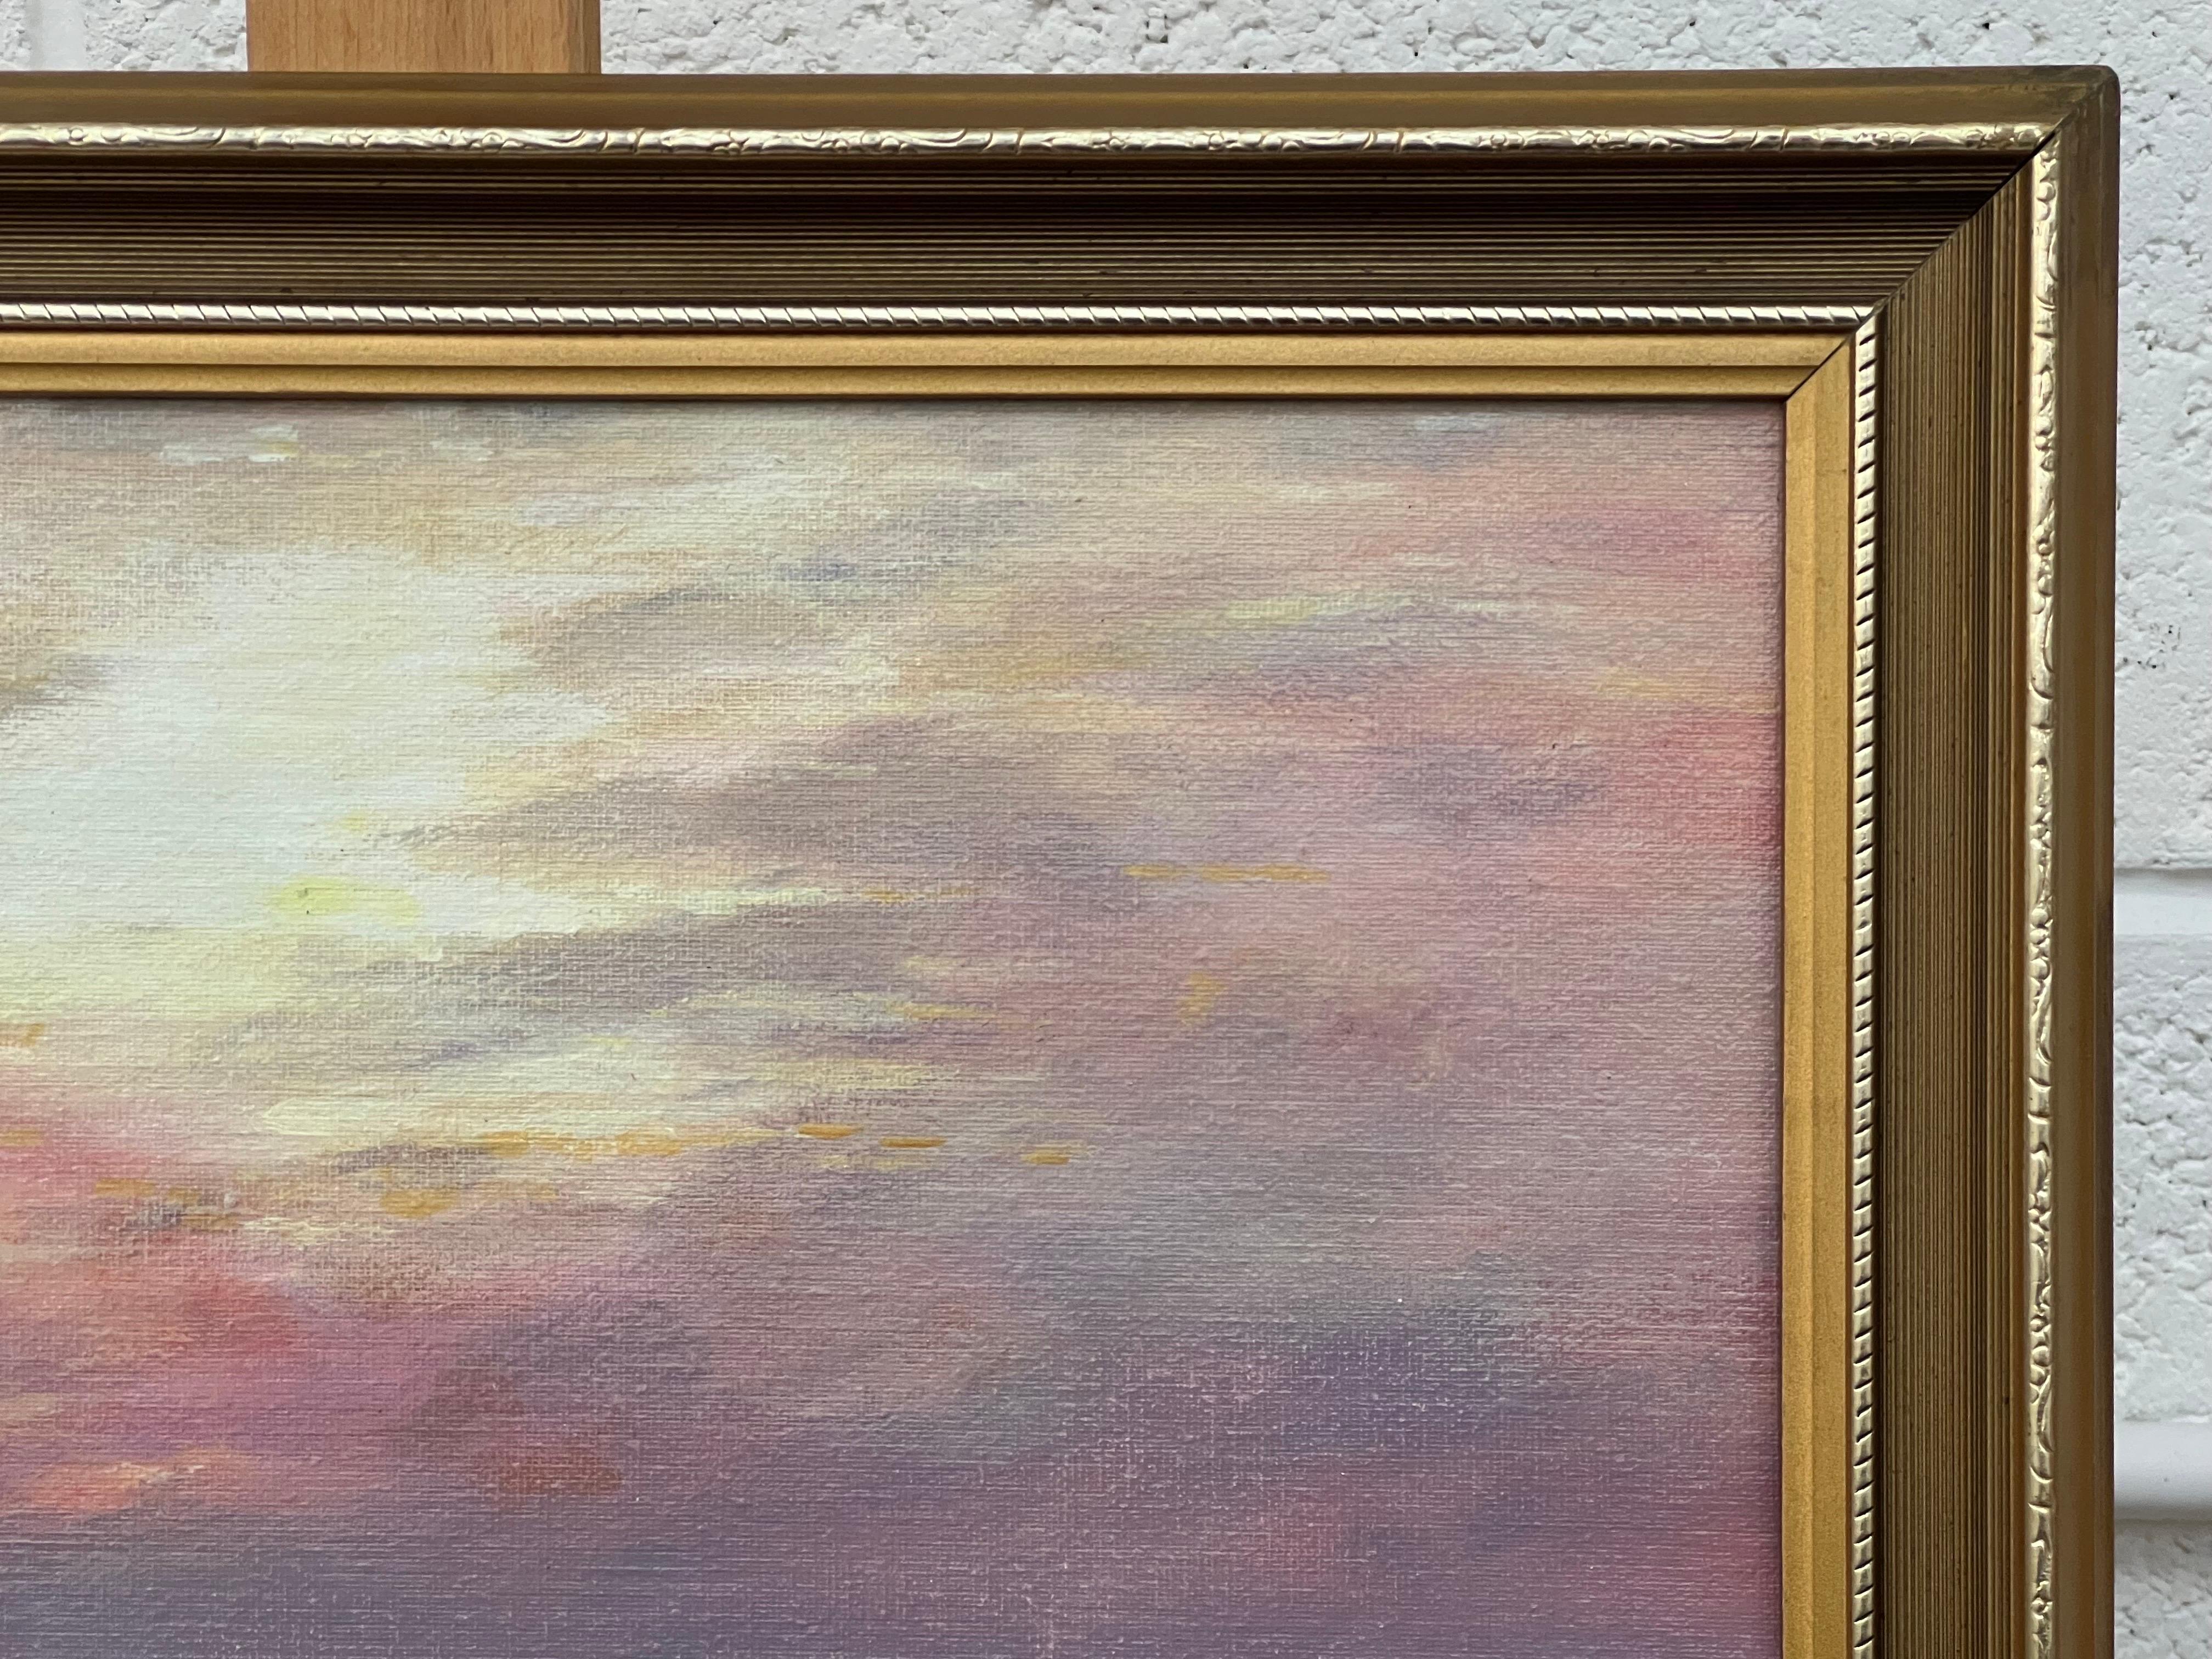 Dawn Seascape Painting with Pink Sky and Waves by 20th Century British Artist For Sale 2